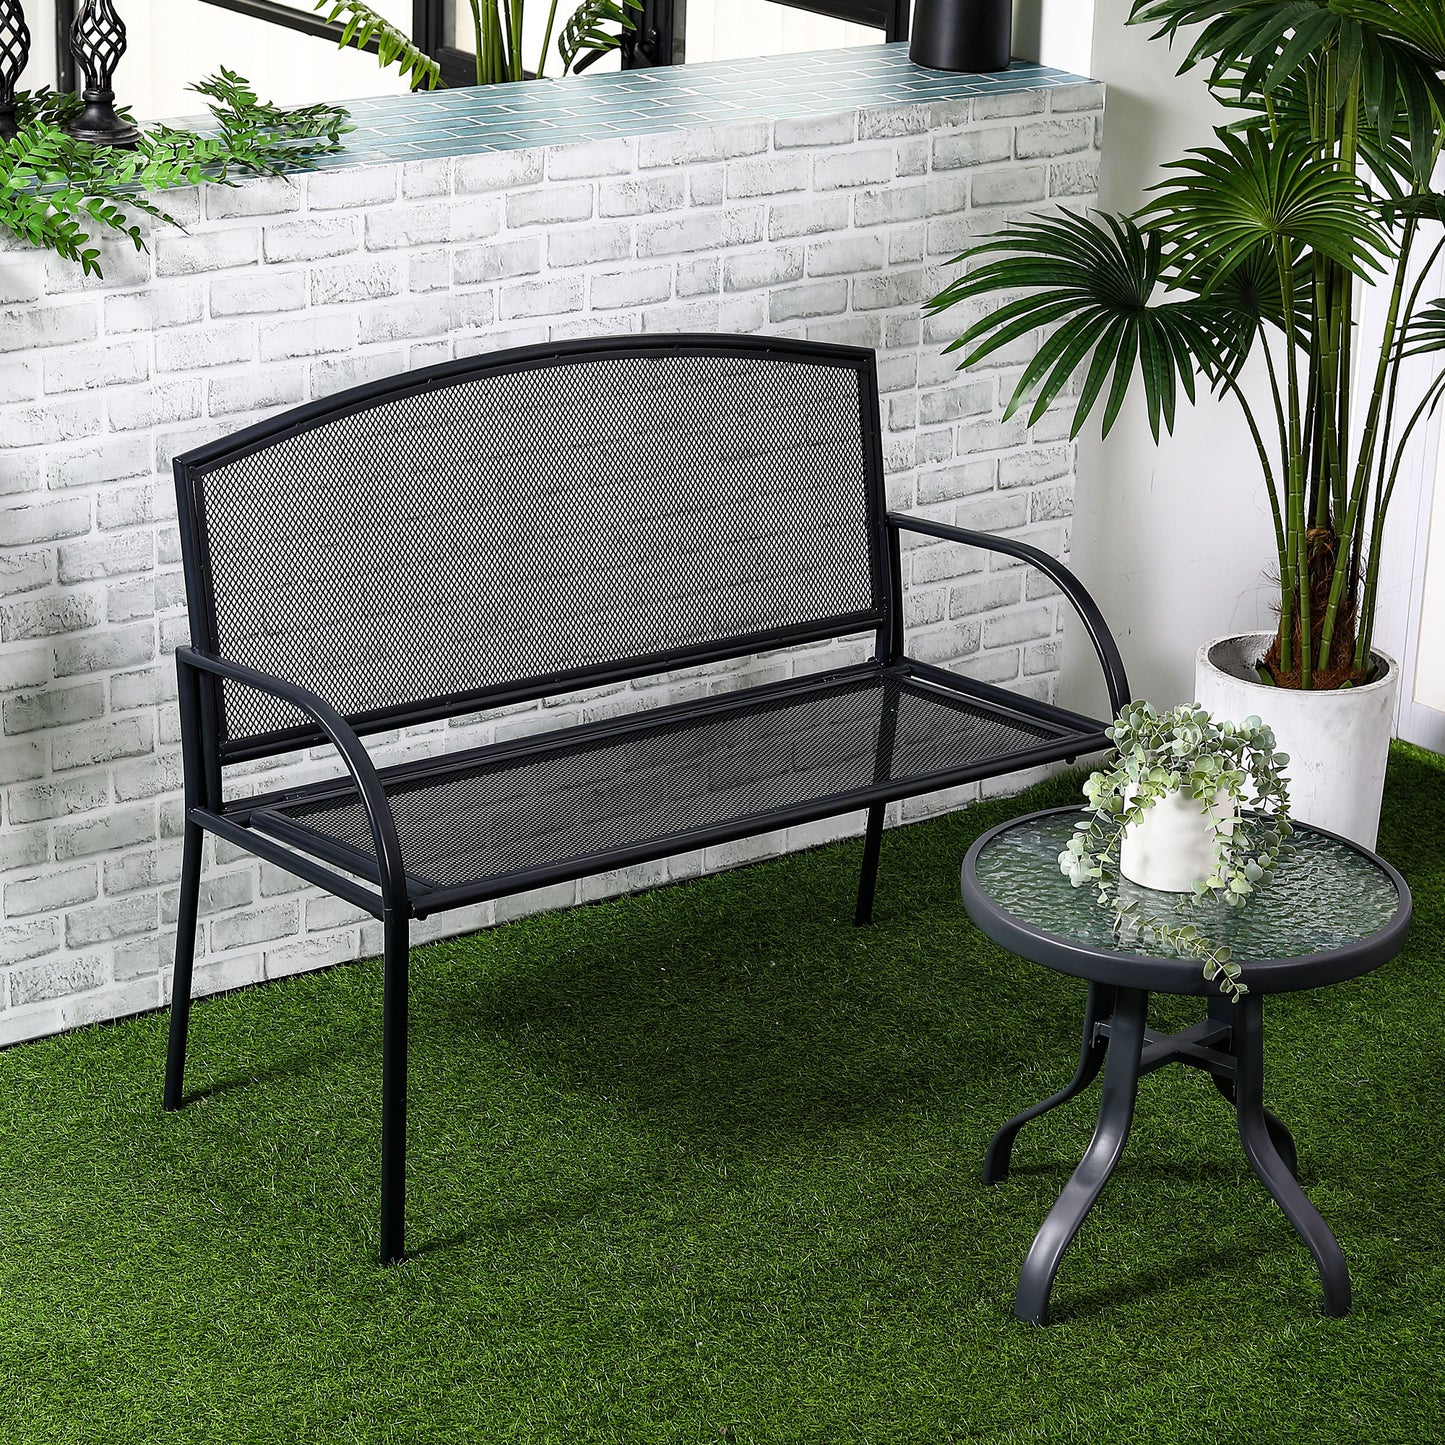 Outsunny Metal Garden Bench, 2 Seater Outdoor Furniture Chair, Loveseat for Patio, Park, Porch and Lawn, Grey